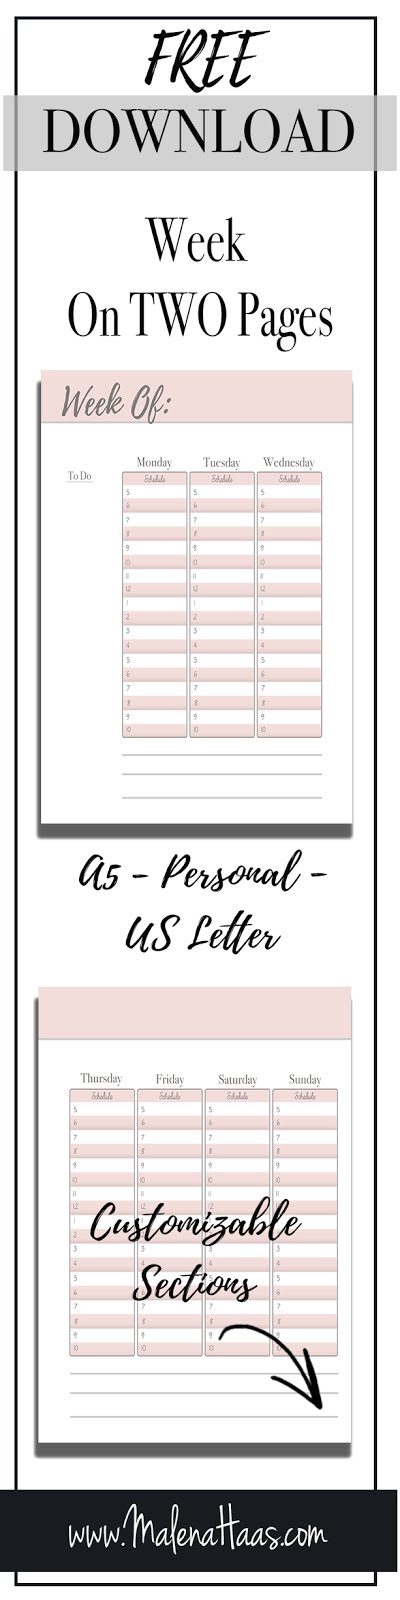  Free Download Week On Two Pages Pink and Grey in Multiple Sizes A5 GM Personal MM and US Letter for printing and inserting in your planner http://www.malenahaas.com/2018/05/freebie-friday-week-at-glance-a5-mm-gm.html